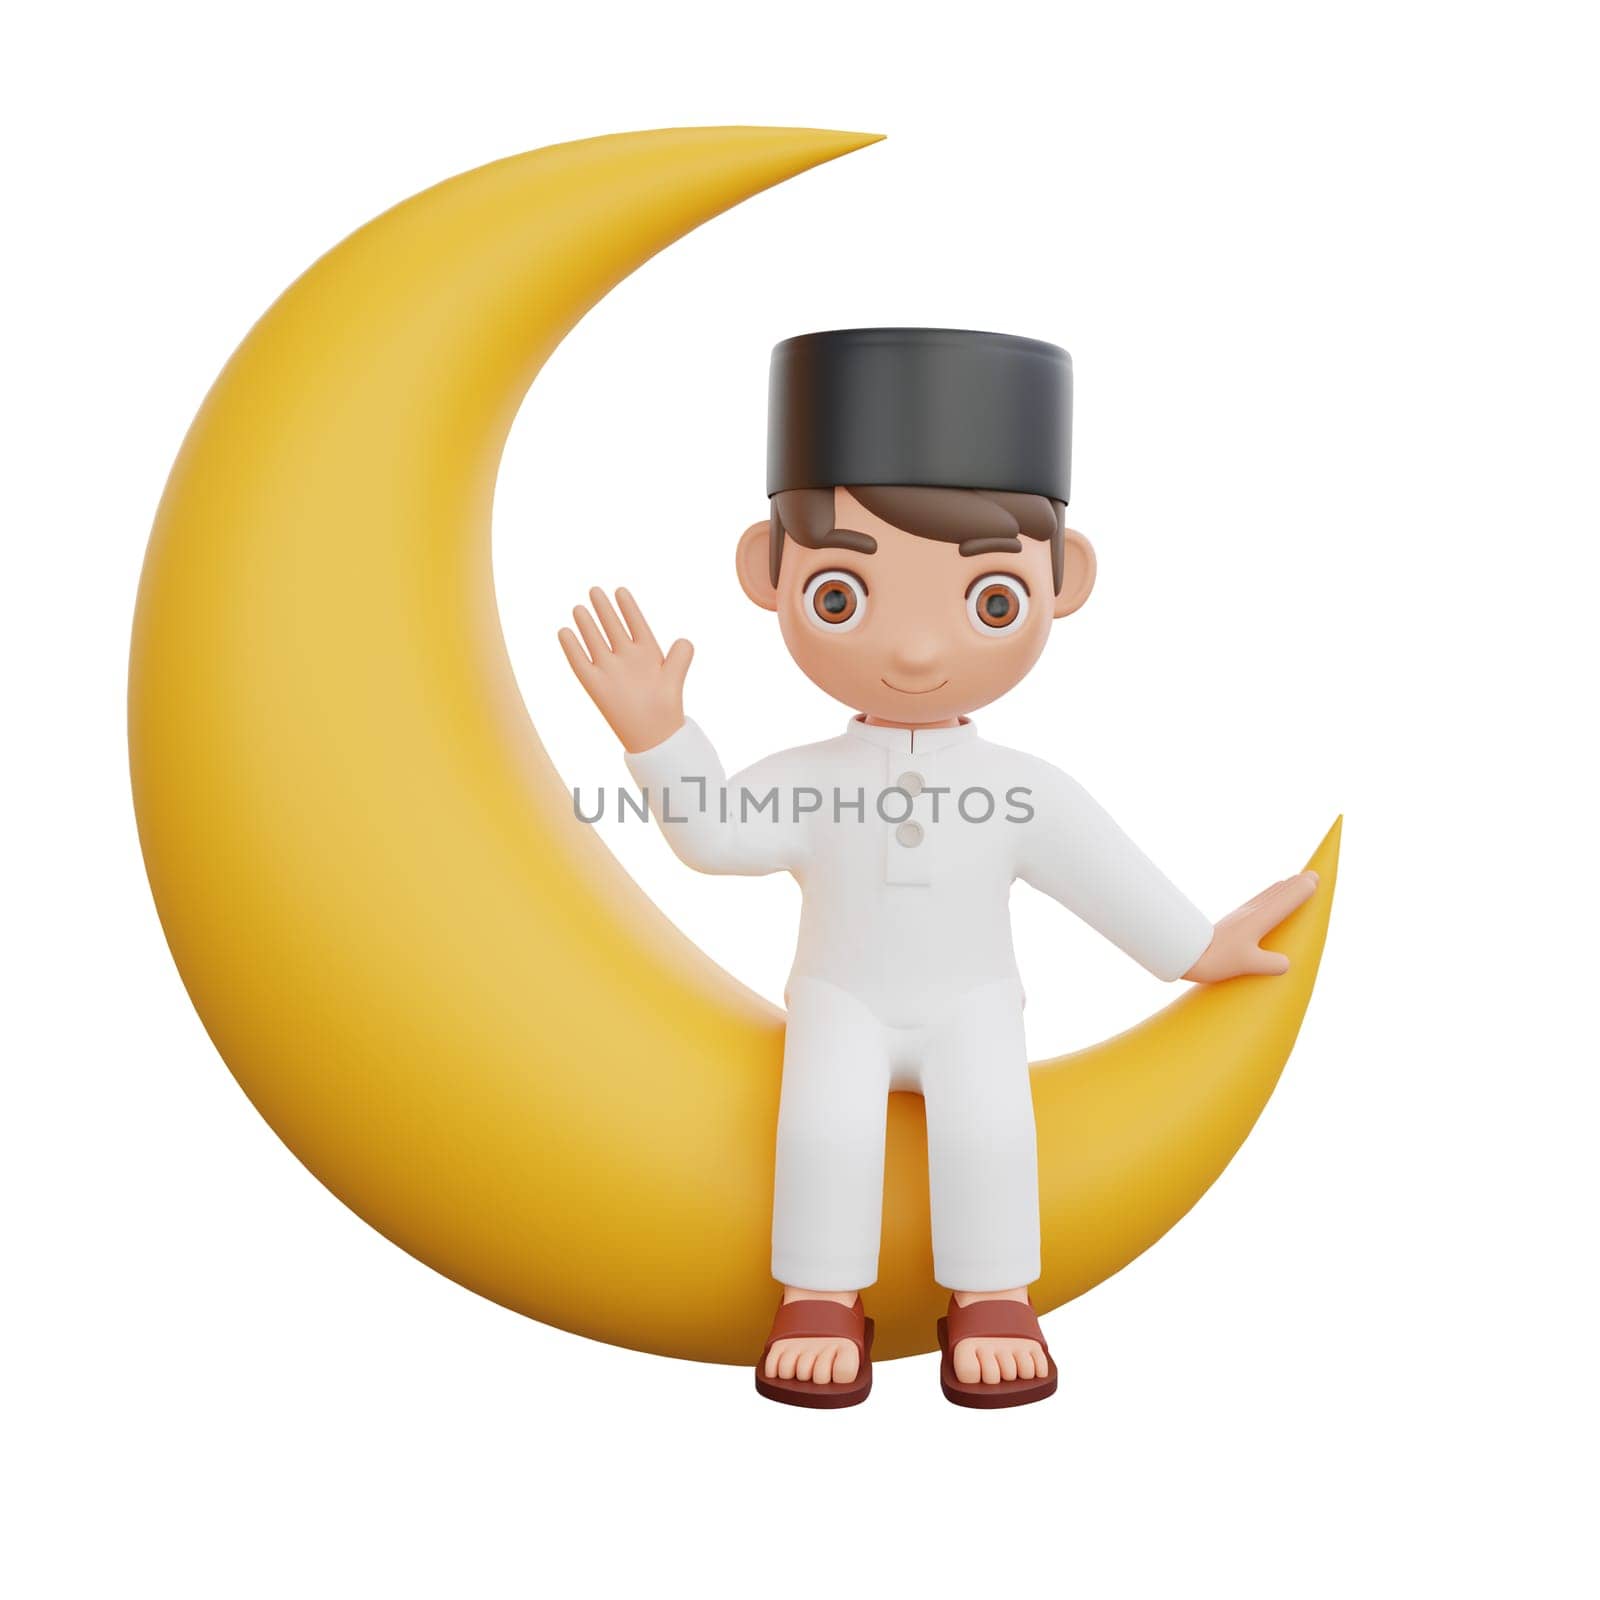 3D Illustration of Muslim character joyful waving hello while sitting on a bright crescent moon, perfect for Ramadan kareem themed projects